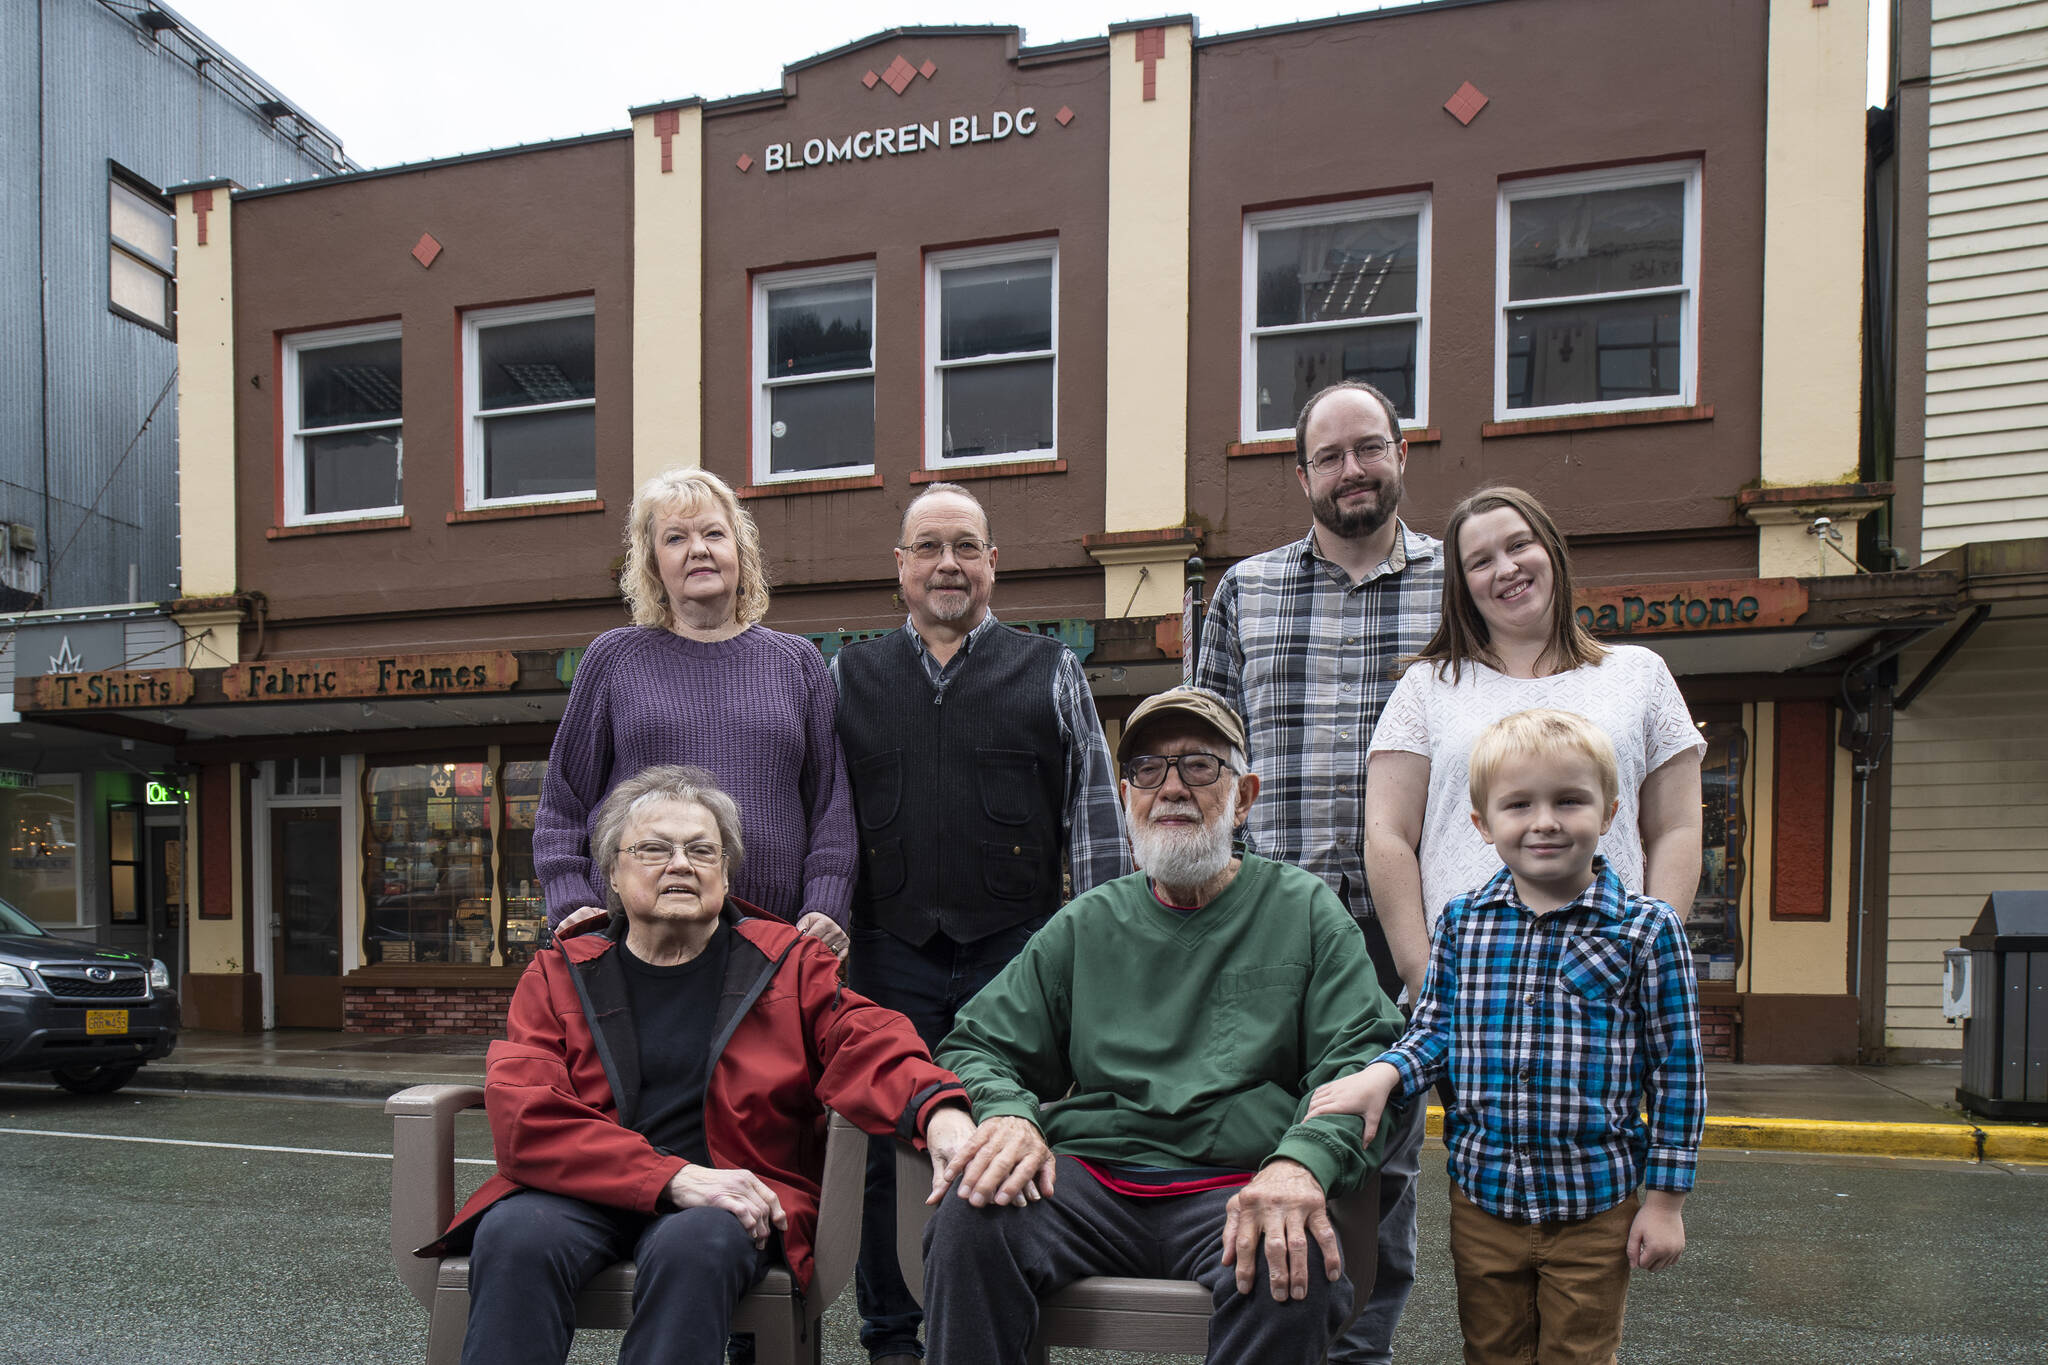 Four generations of the Wiley family pose before the Front Street business the family has owned for fifty years in the historic Blomgren Building. Sally and Fred Wiley, seated, took over the Ben Franklin Store in 1972. Shannon and Mike Wiley stand with Stephen Bishop and Meagan Wiley Bishop and young Nolan Bishop. Today Mike and his daughter Meagan operate the store together. (Michael Penn / For Downtown Business Association)